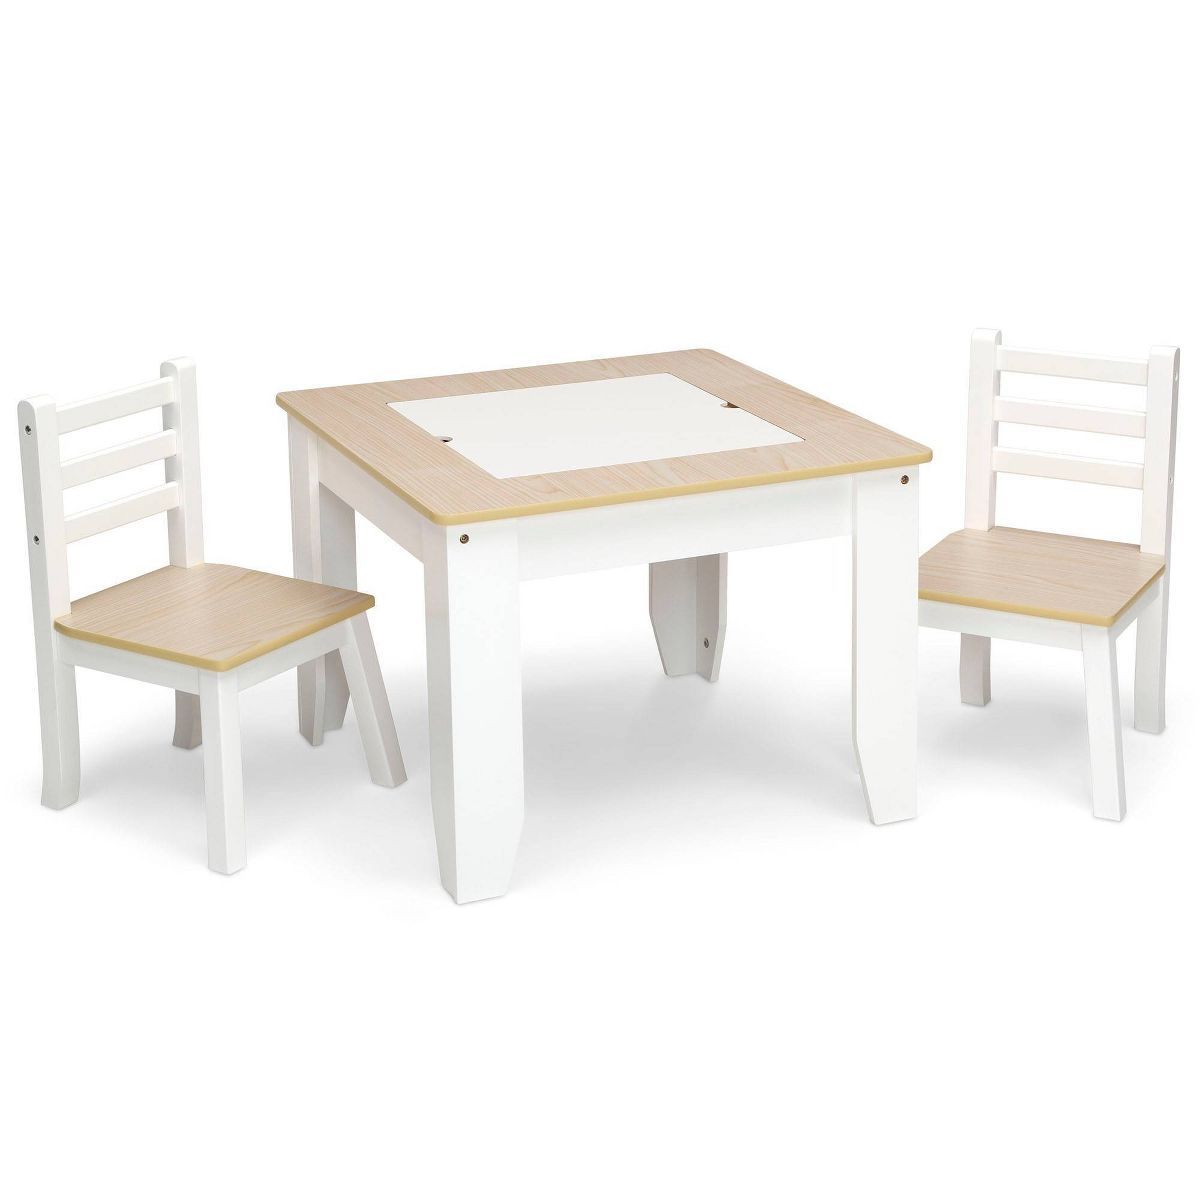 Delta Children Chelsea Table and Chair Set | Target